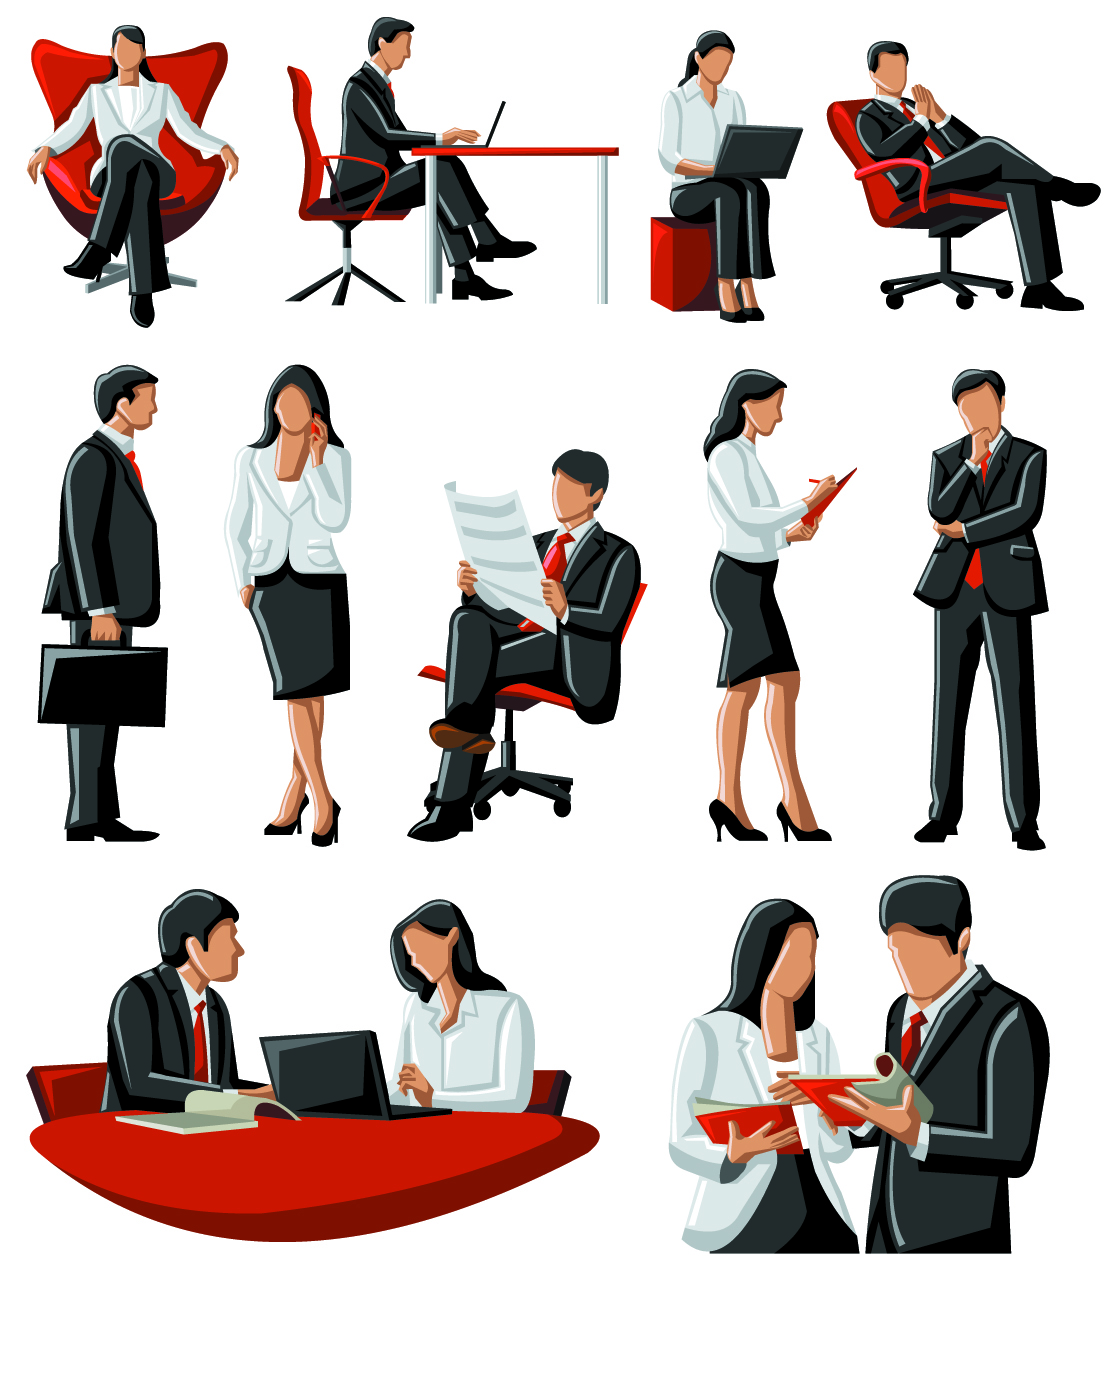 15 Business People Vector Images